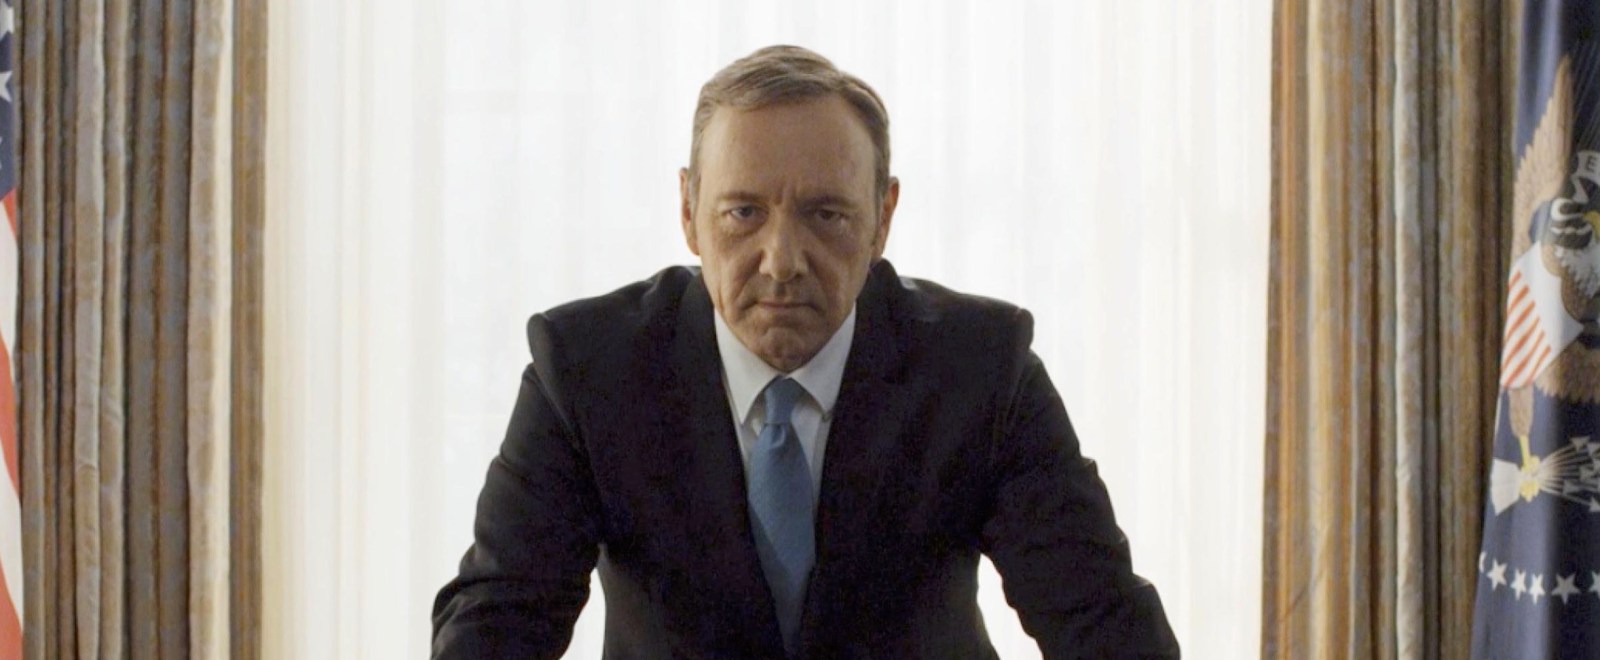 spacey house of cards